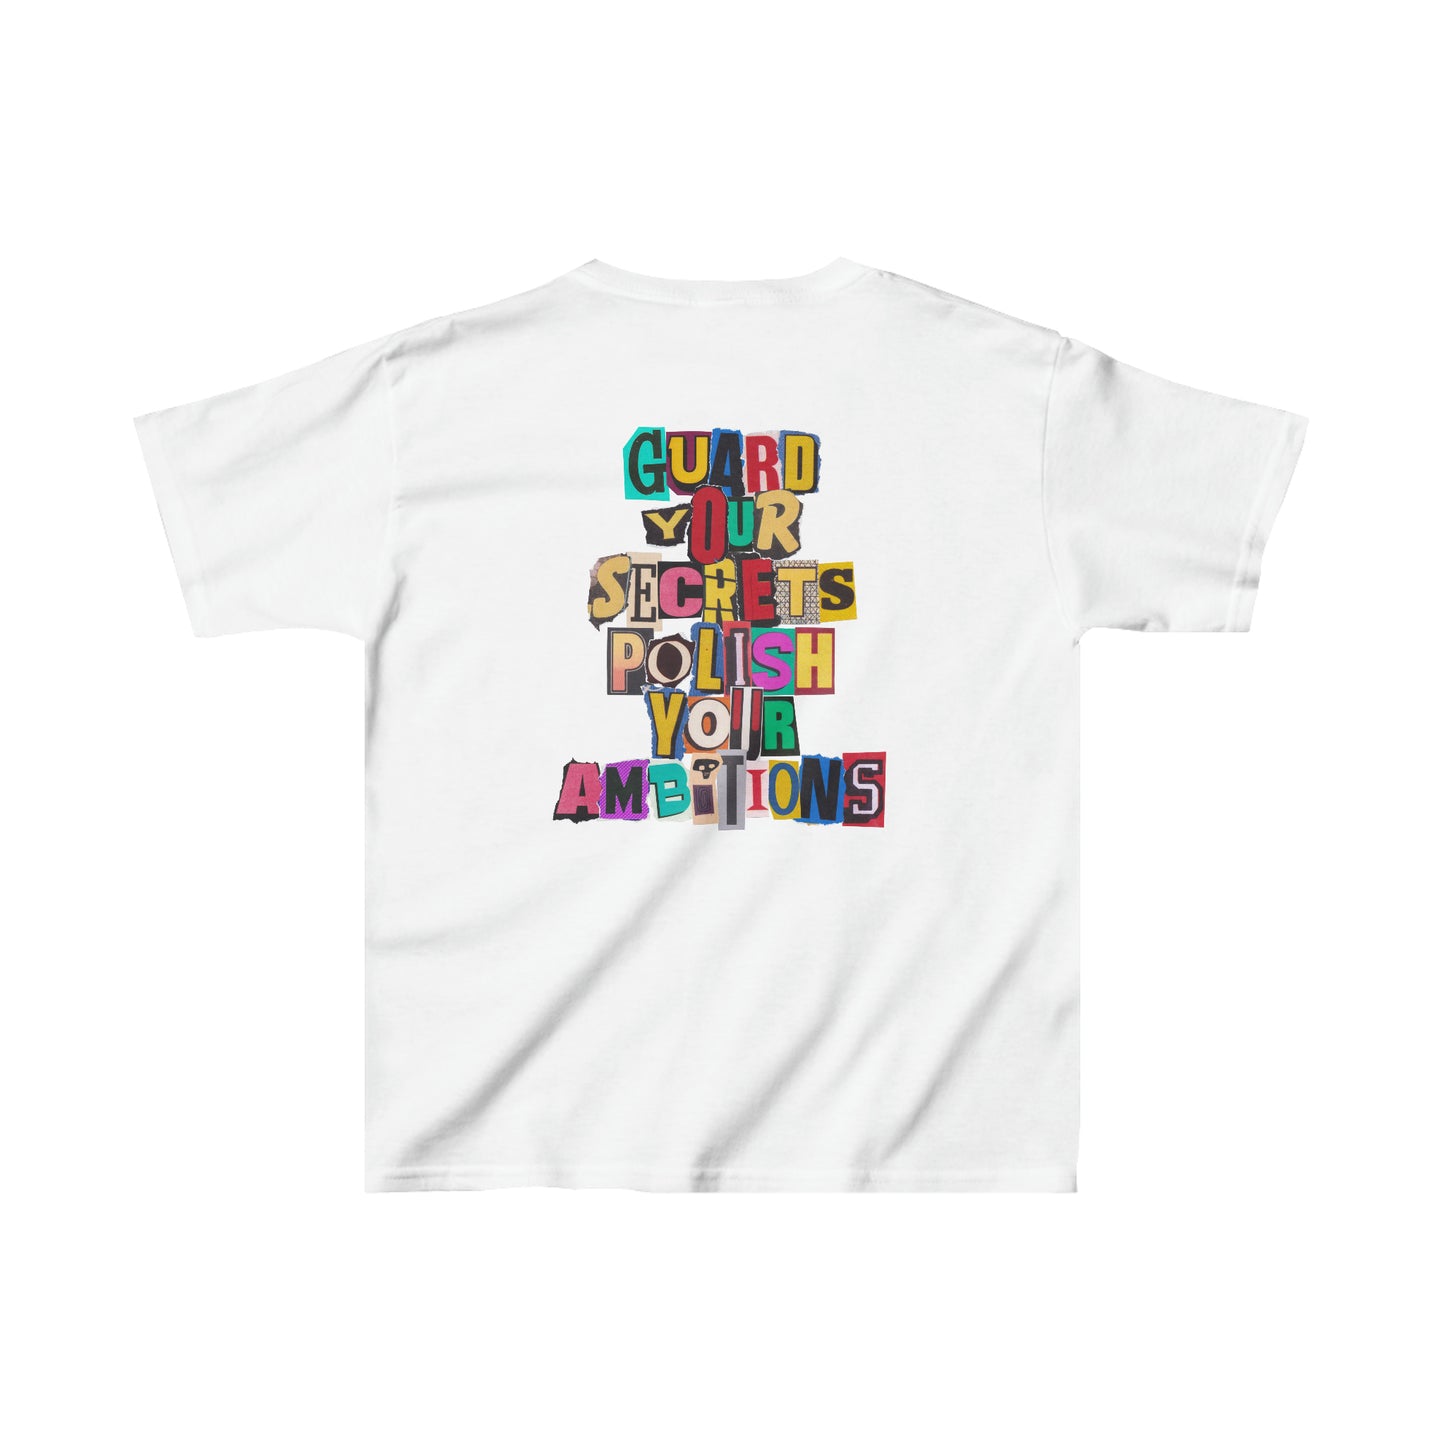 Youth WIY x Doncic Vintage T-Shirt